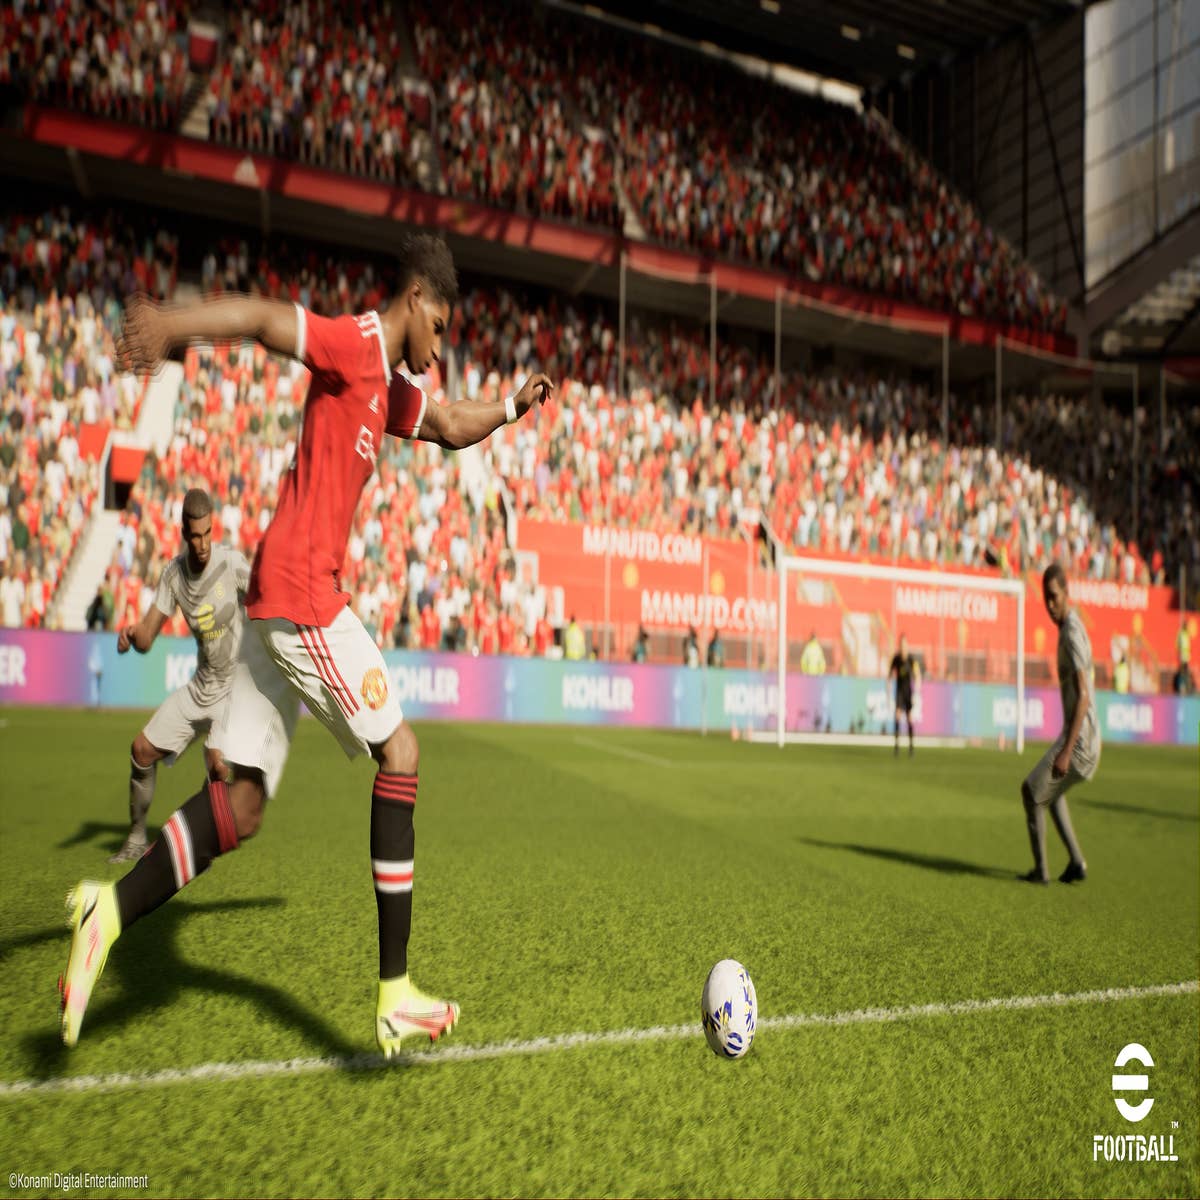 Pro Evolution Soccer Officially Renamed to eFootball, Goes Free to Play in  Autumn